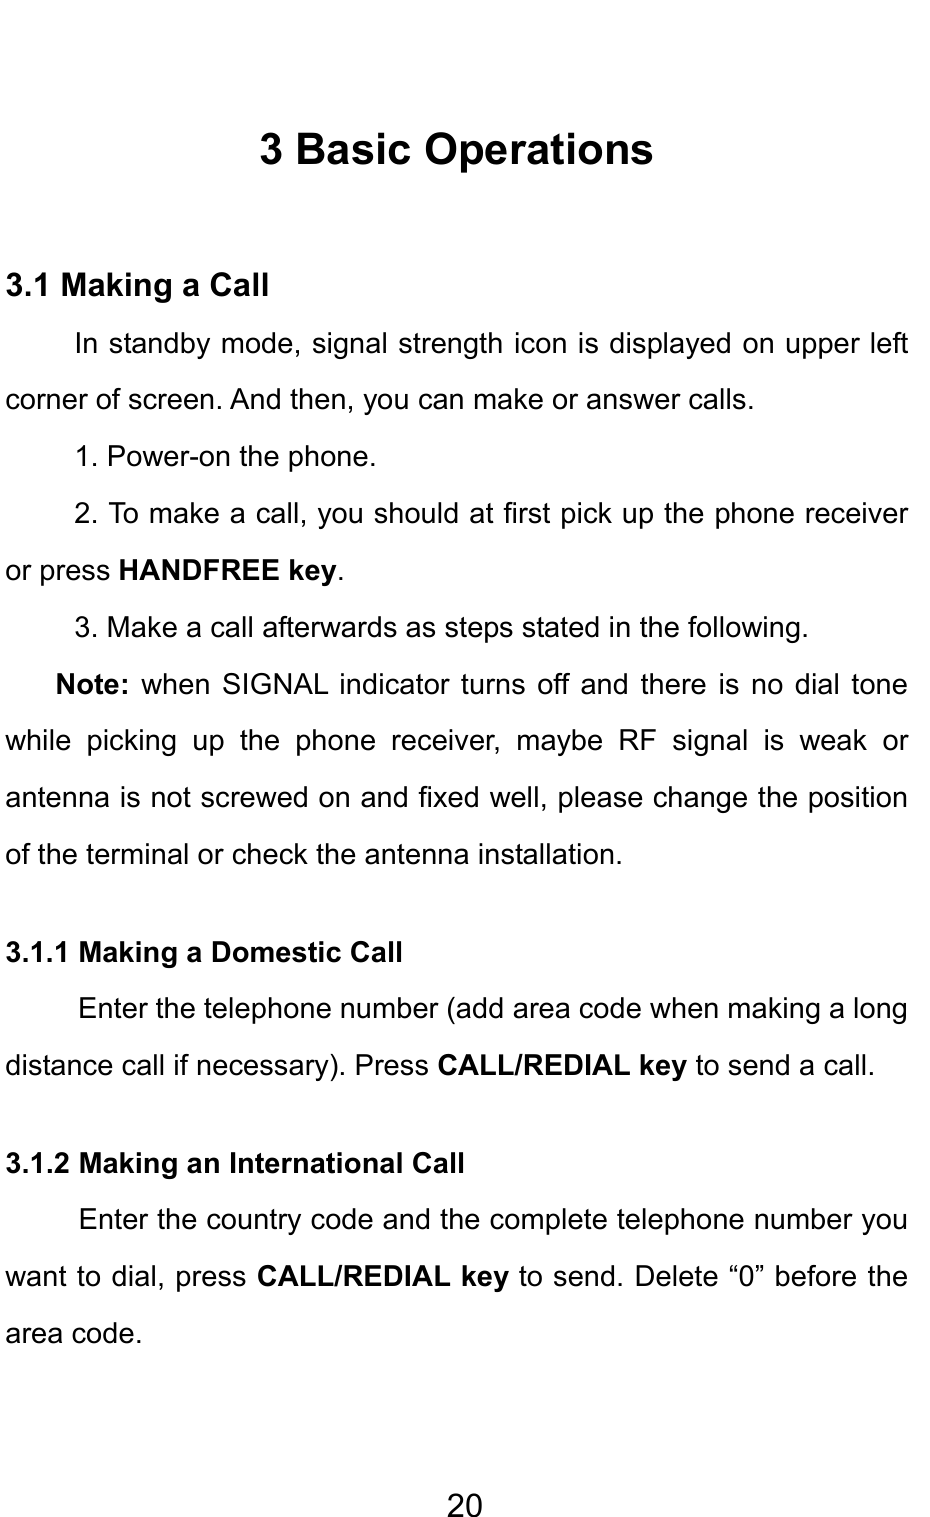                                     203 Basic Operations 3.1 Making a Call In standby mode, signal strength icon is displayed on upper left corner of screen. And then, you can make or answer calls. 1. Power-on the phone. 2. To make a call, you should at first pick up the phone receiver or press HANDFREE key. 3. Make a call afterwards as steps stated in the following. Note: when SIGNAL indicator turns off and there is no dial tone while picking up the phone receiver, maybe RF signal is weak or antenna is not screwed on and fixed well, please change the position of the terminal or check the antenna installation. 3.1.1 Making a Domestic Call Enter the telephone number (add area code when making a long distance call if necessary). Press CALL/REDIAL key to send a call. 3.1.2 Making an International Call  Enter the country code and the complete telephone number you want to dial, press CALL/REDIAL key to send. Delete “0” before the area code. 